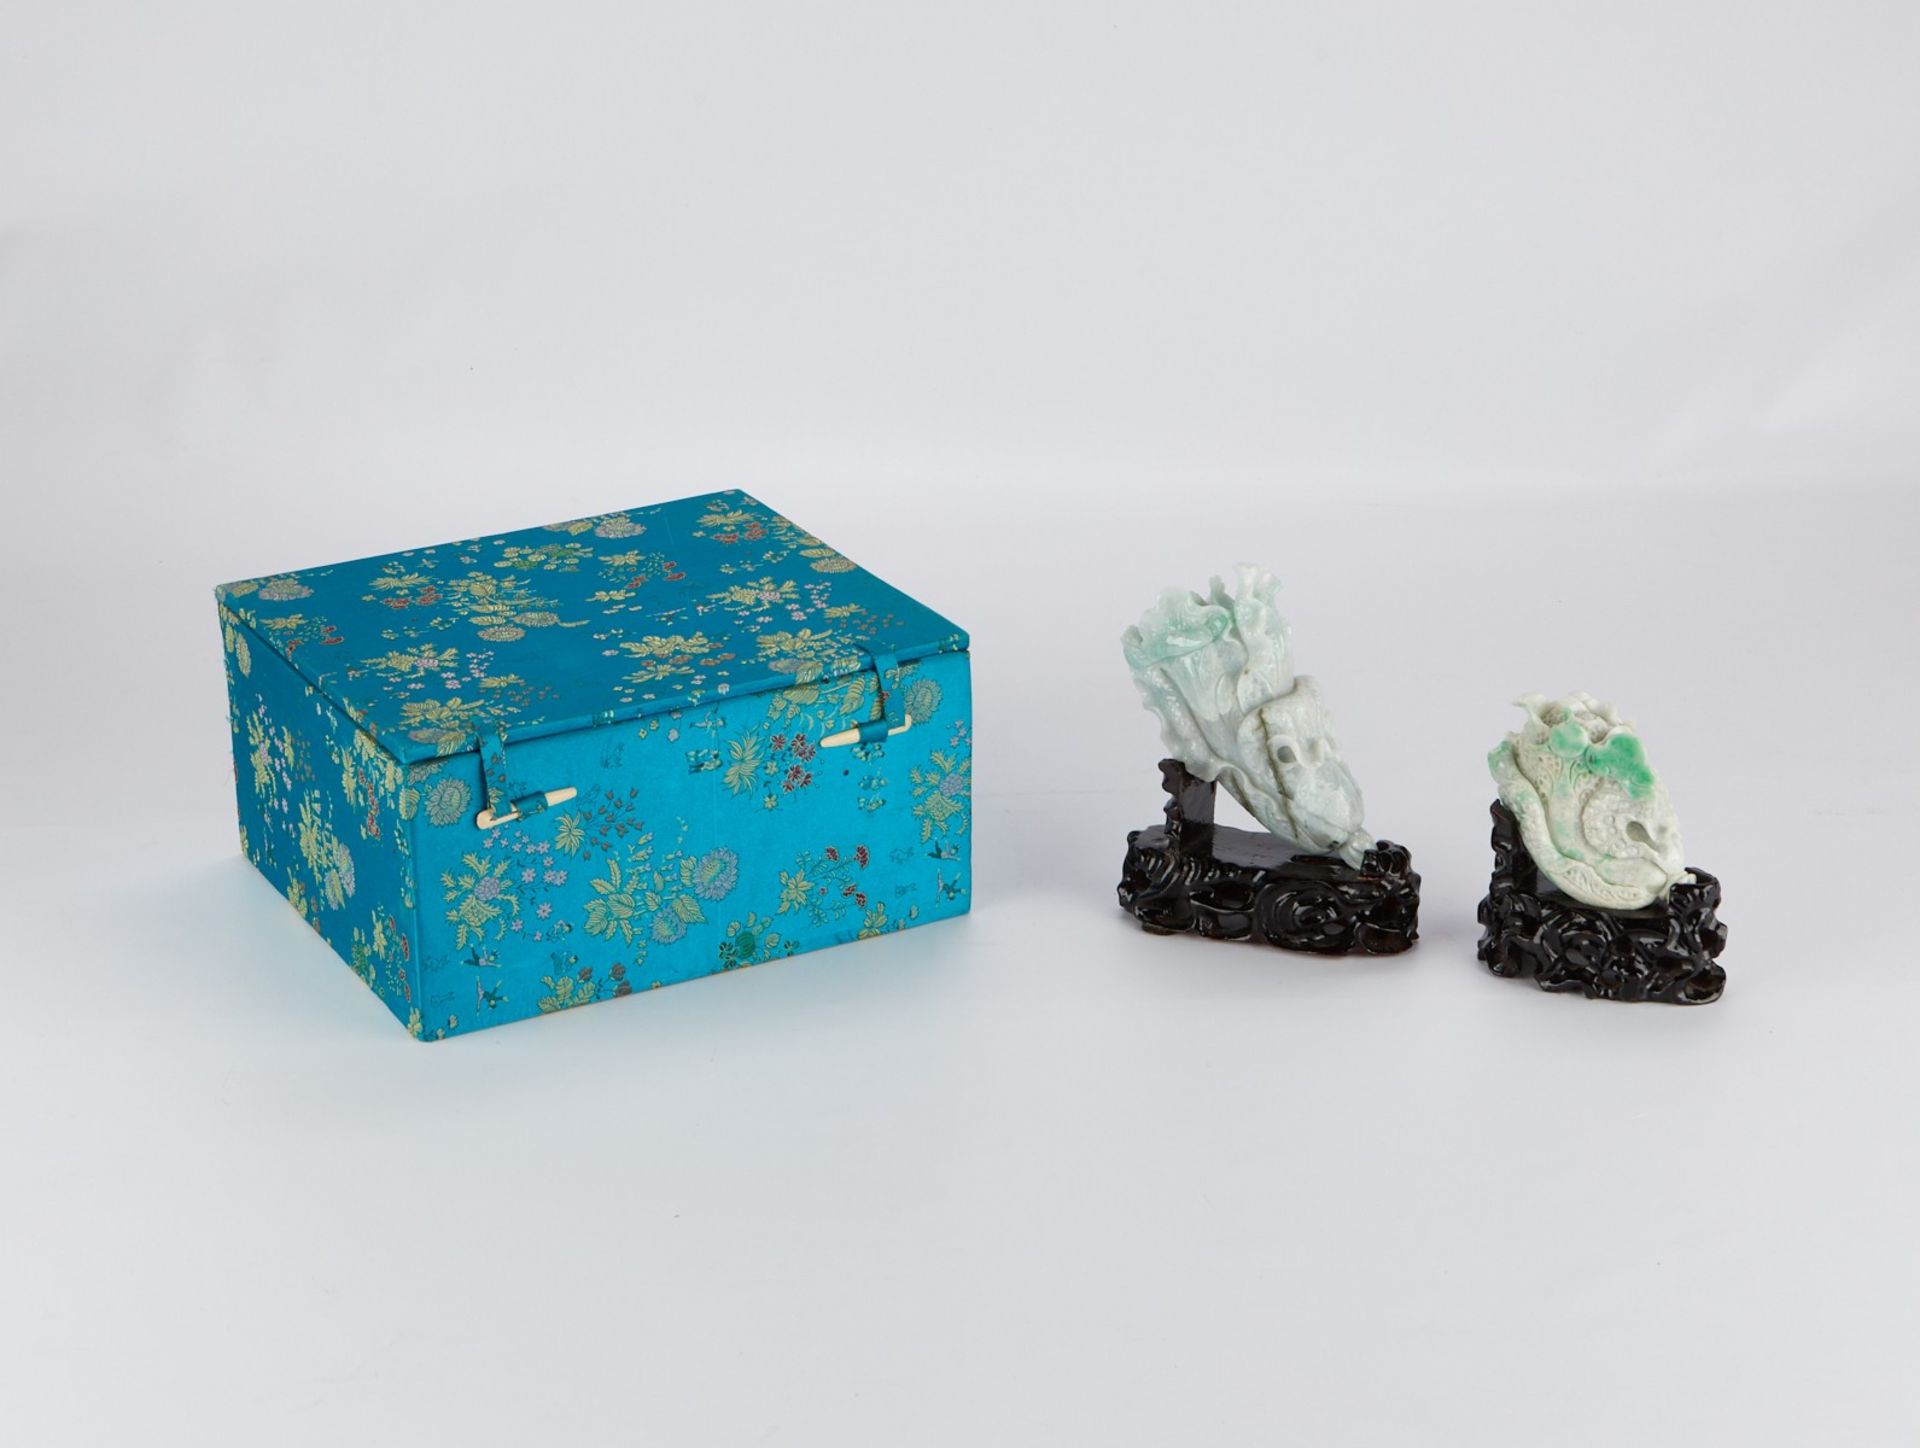 2 Fine Chinese Carved Jade Cabbages - Image 11 of 11